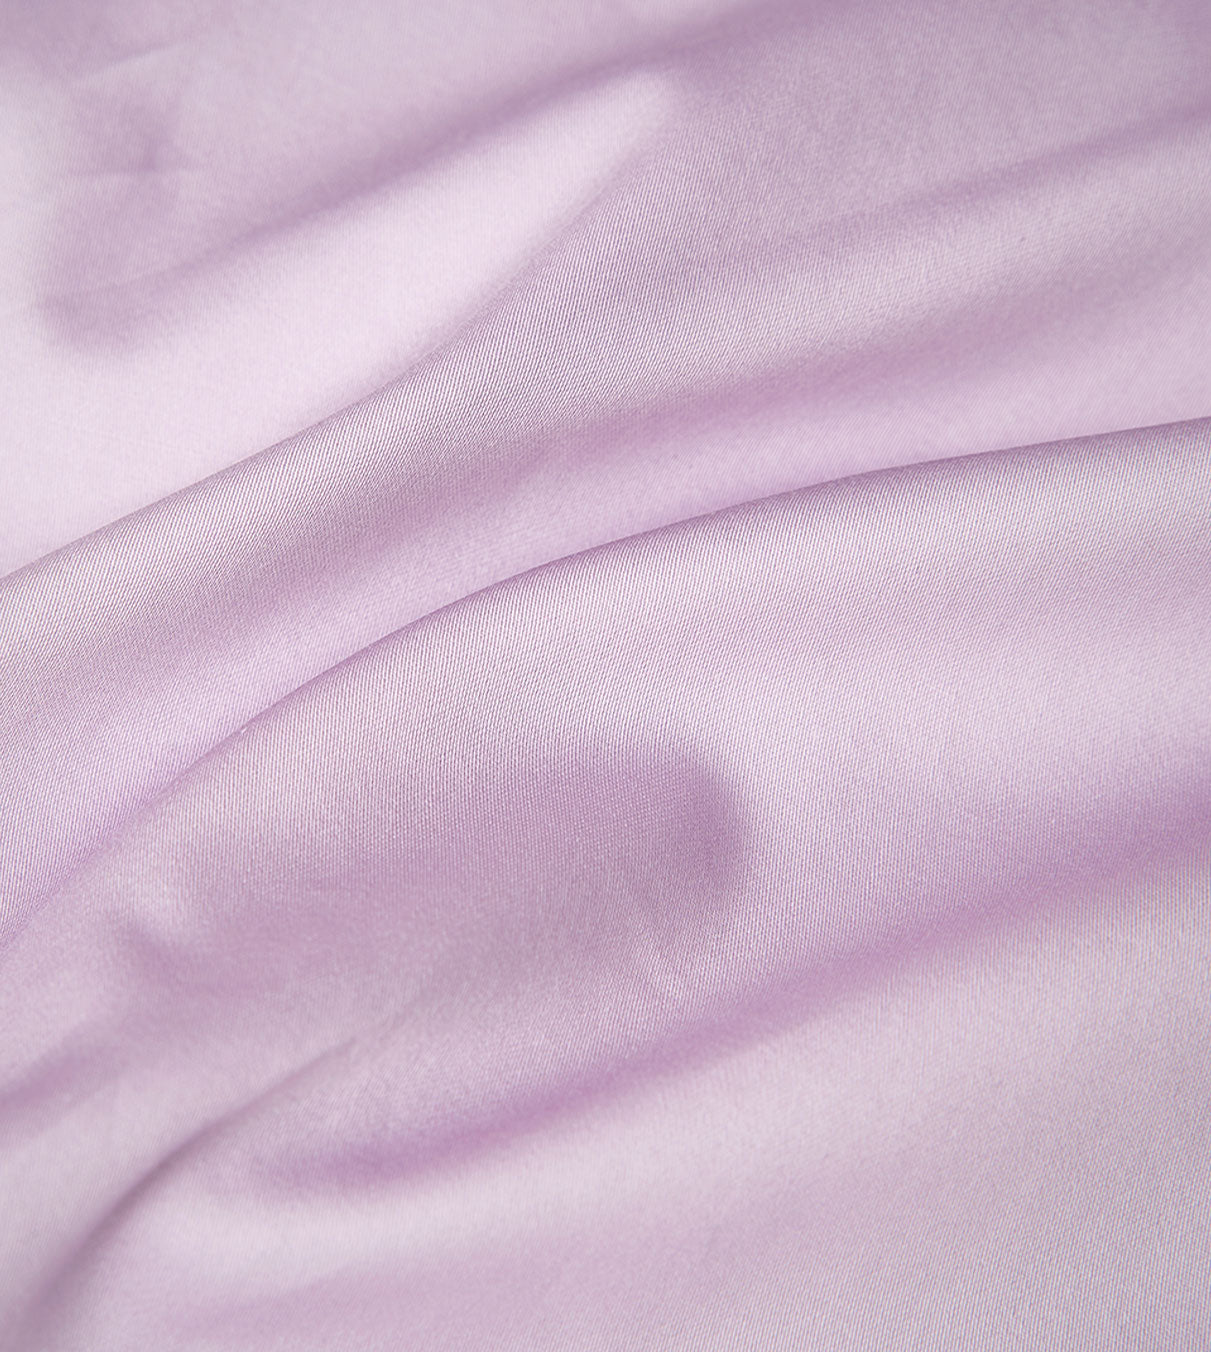 Product: Cotton Weighted Blanket Duvet Cover | Color: Sateen Lavender